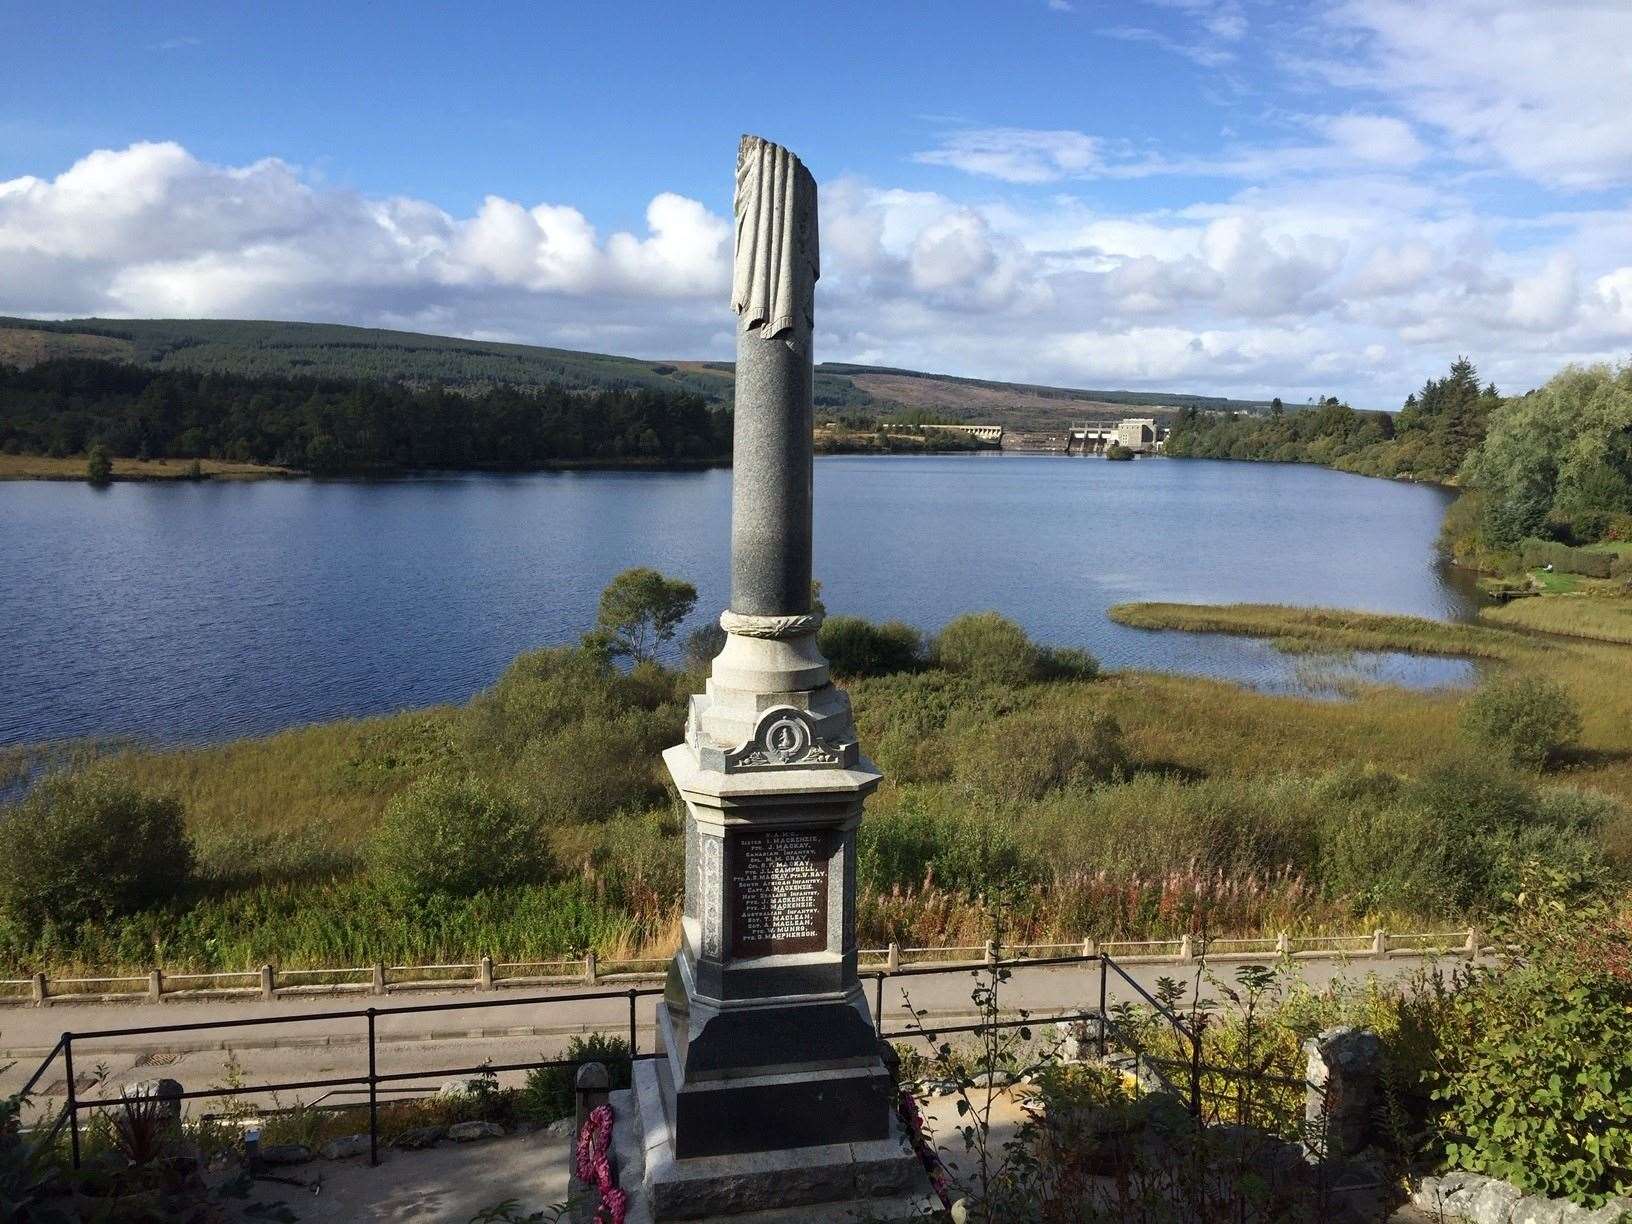 Members of the Lairg community are celebrating the 100th anniversary of the village's war memorial.